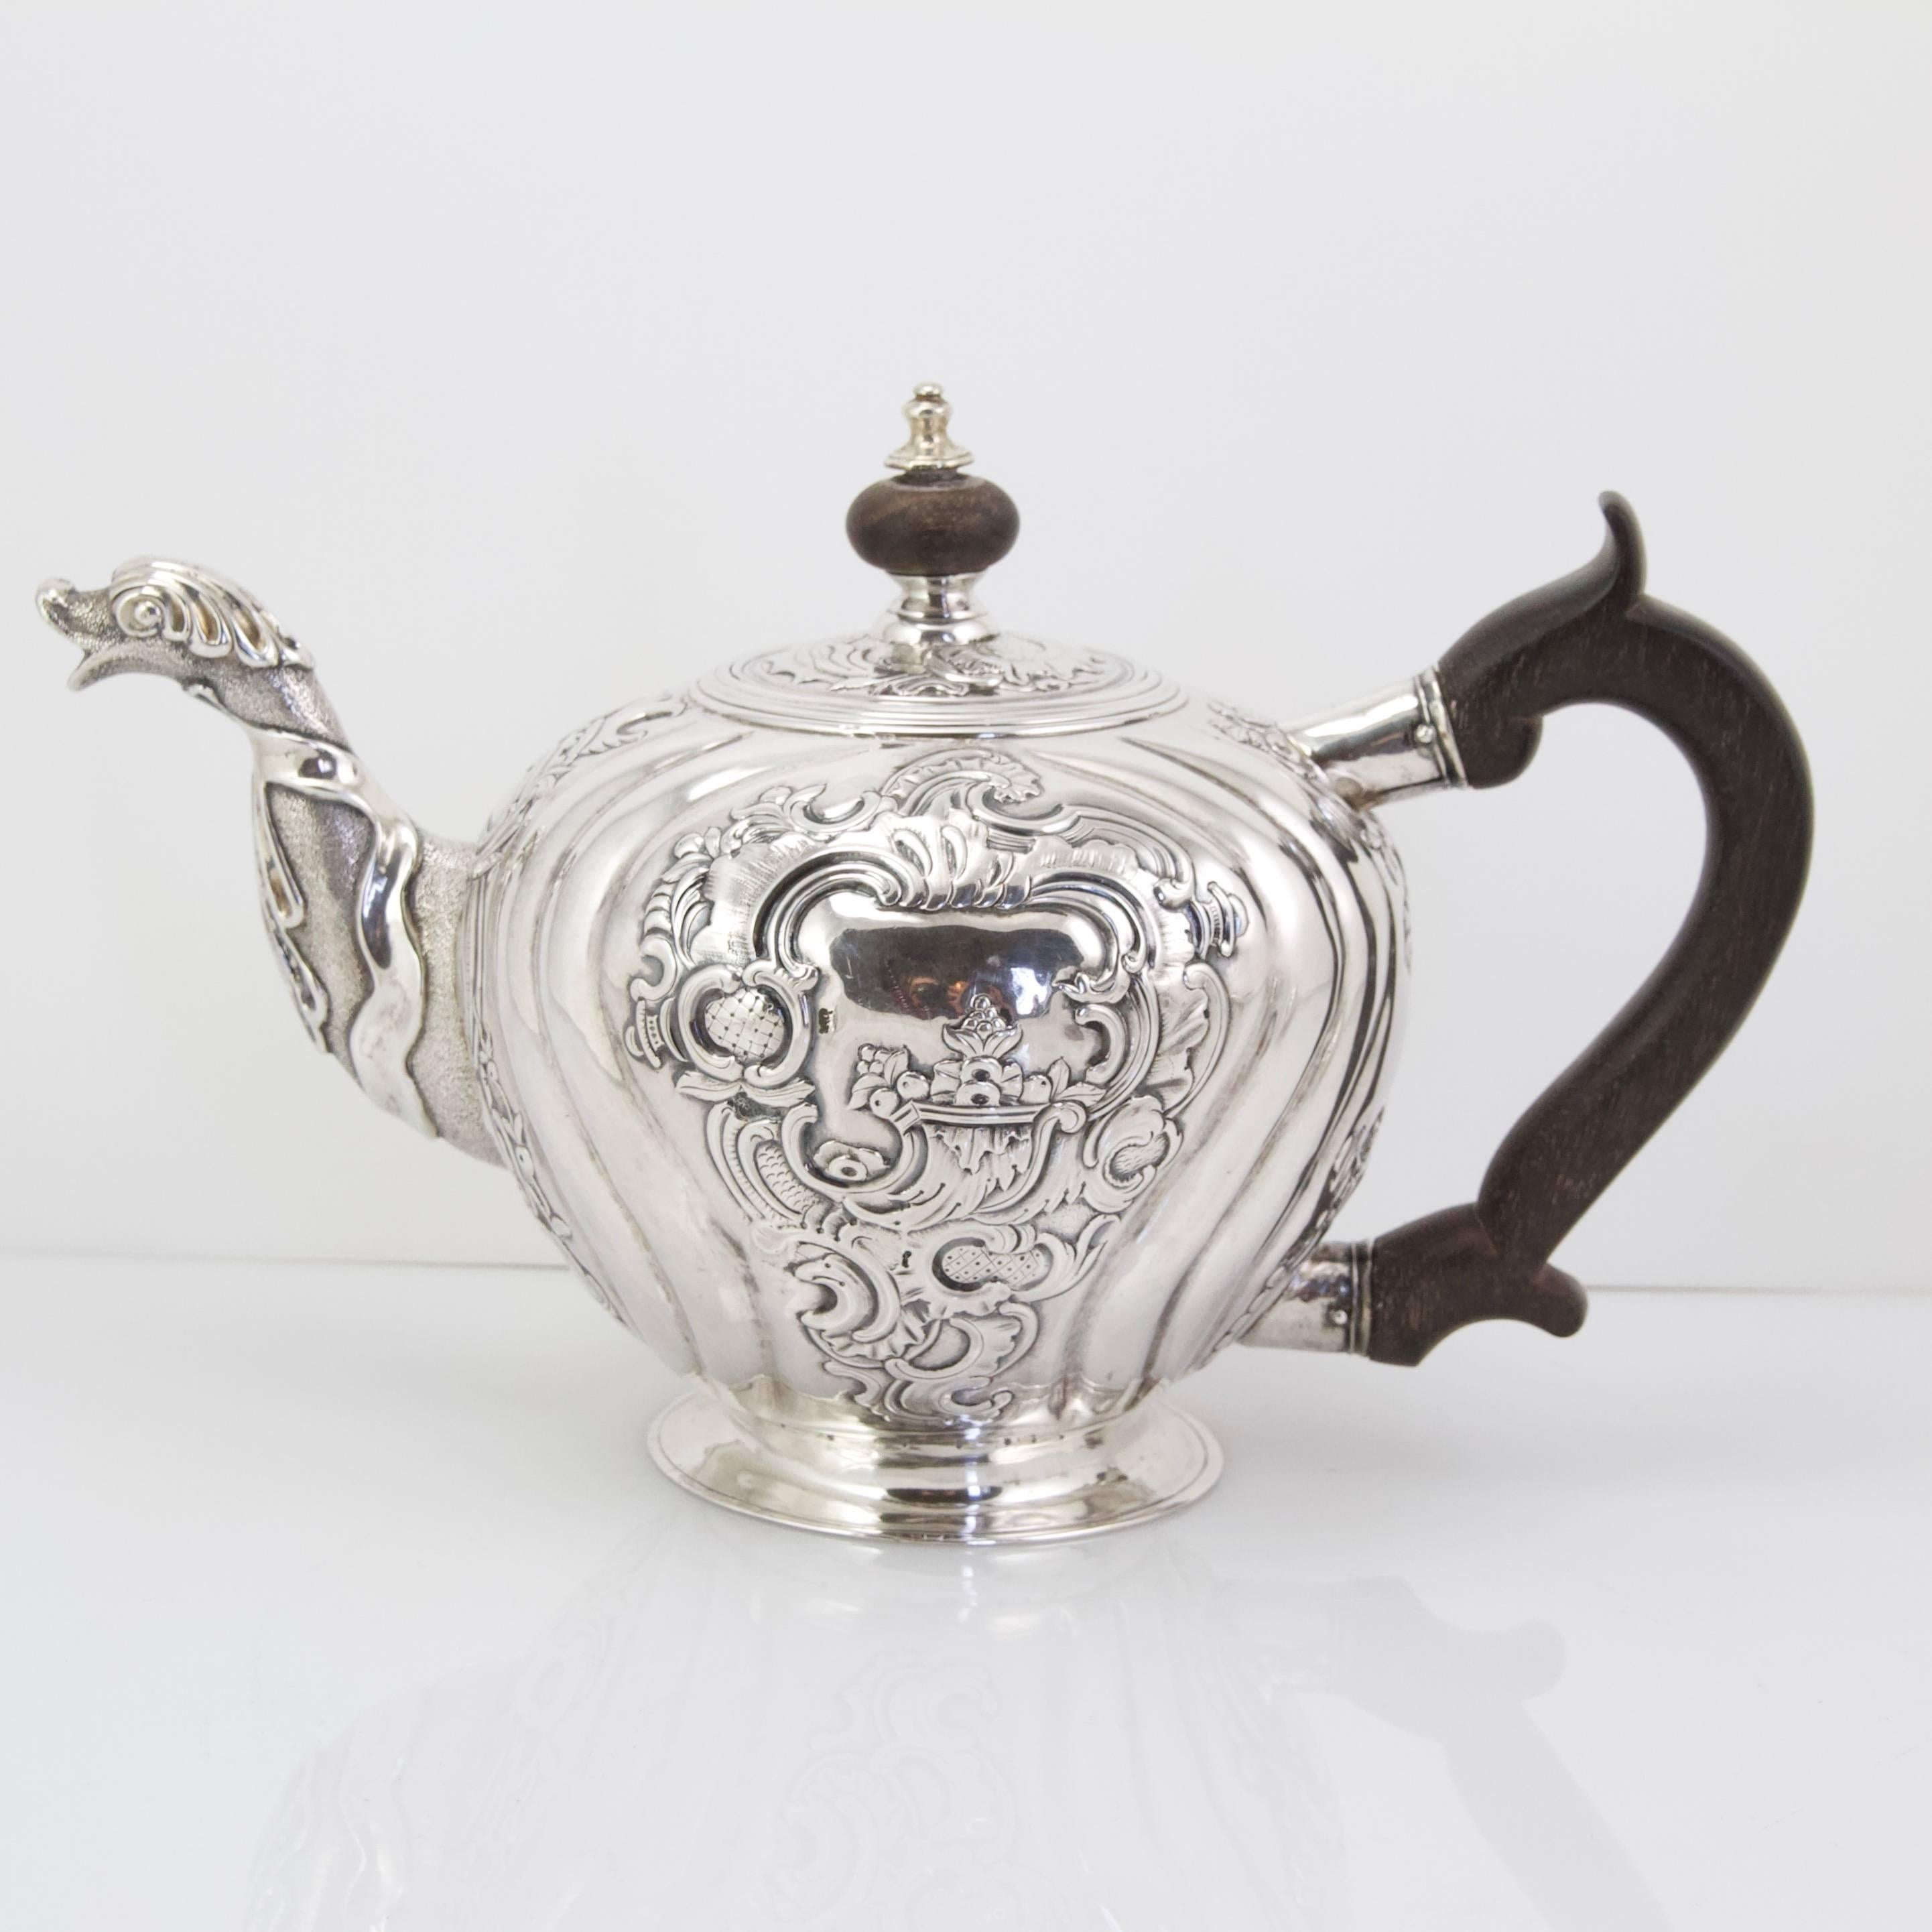 Very rare silver sterling tea pot made in Moscow in 1768. Masterpiece for its qualities of execution and its age. Vermeil inside. 
Maker mark PS for Piotr Cemenov (maker 1739-1777) ( Posnikova n° 963)
Mark for Moscow 1768
Russian assays mark: BA